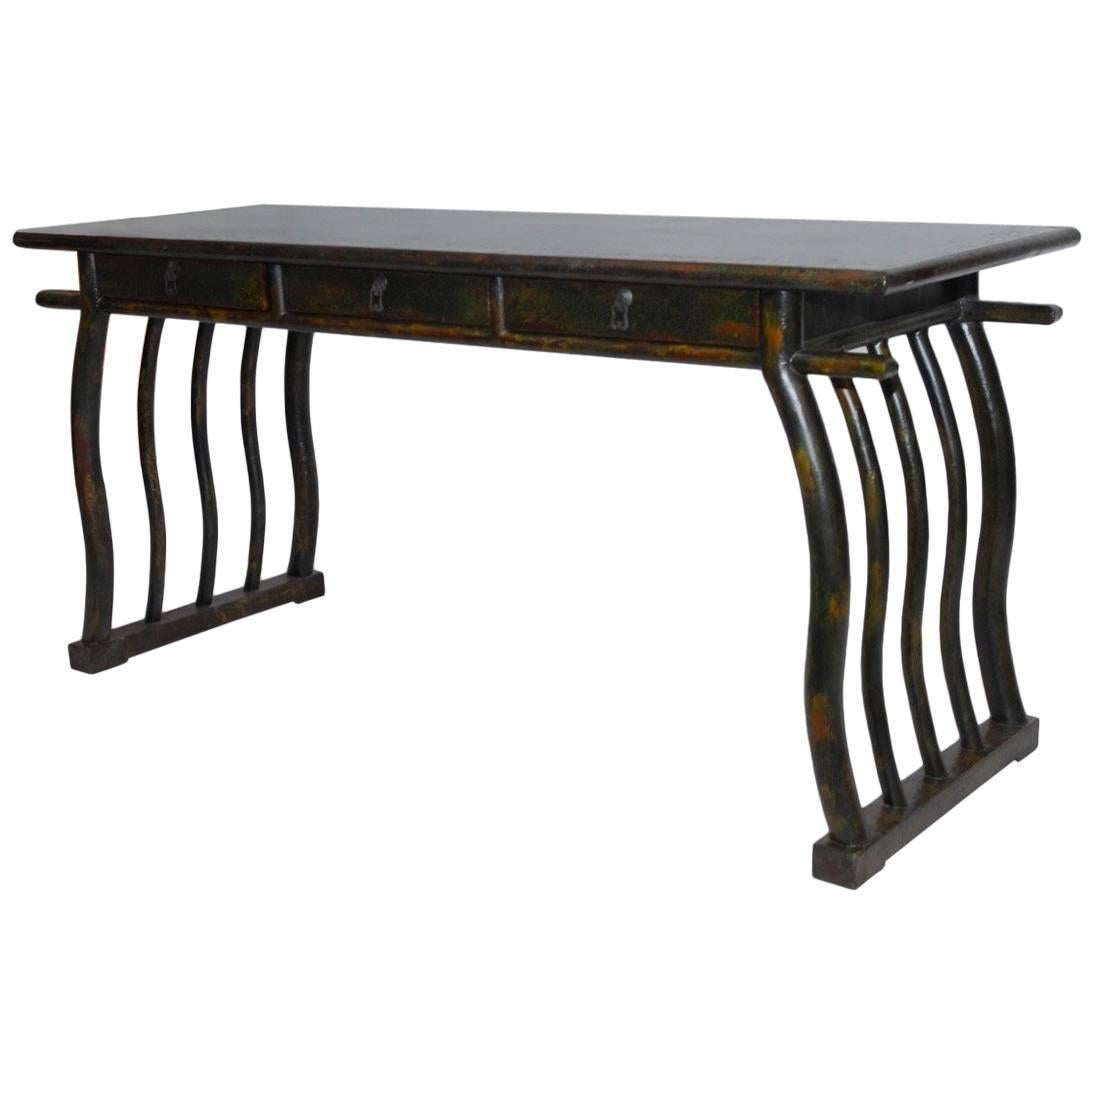 Chinese Lacquered Desk with Serpentine Legs